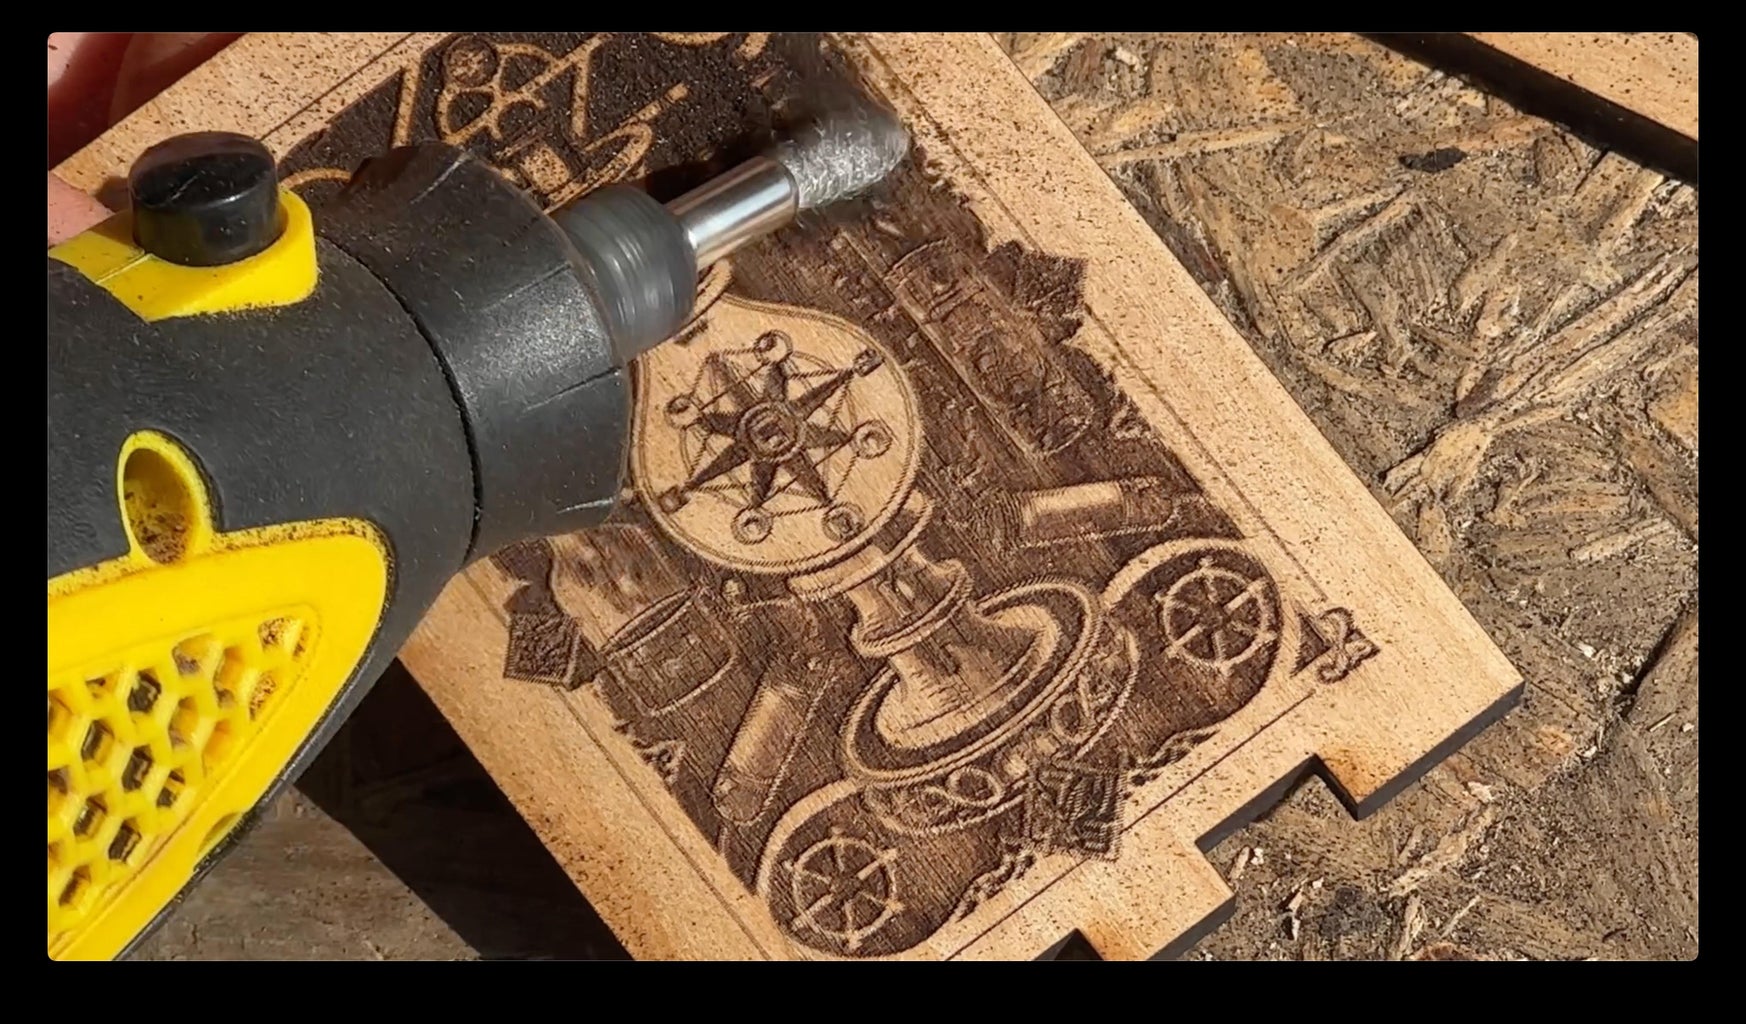 Clean Engravings From the Wooden Burn Dust